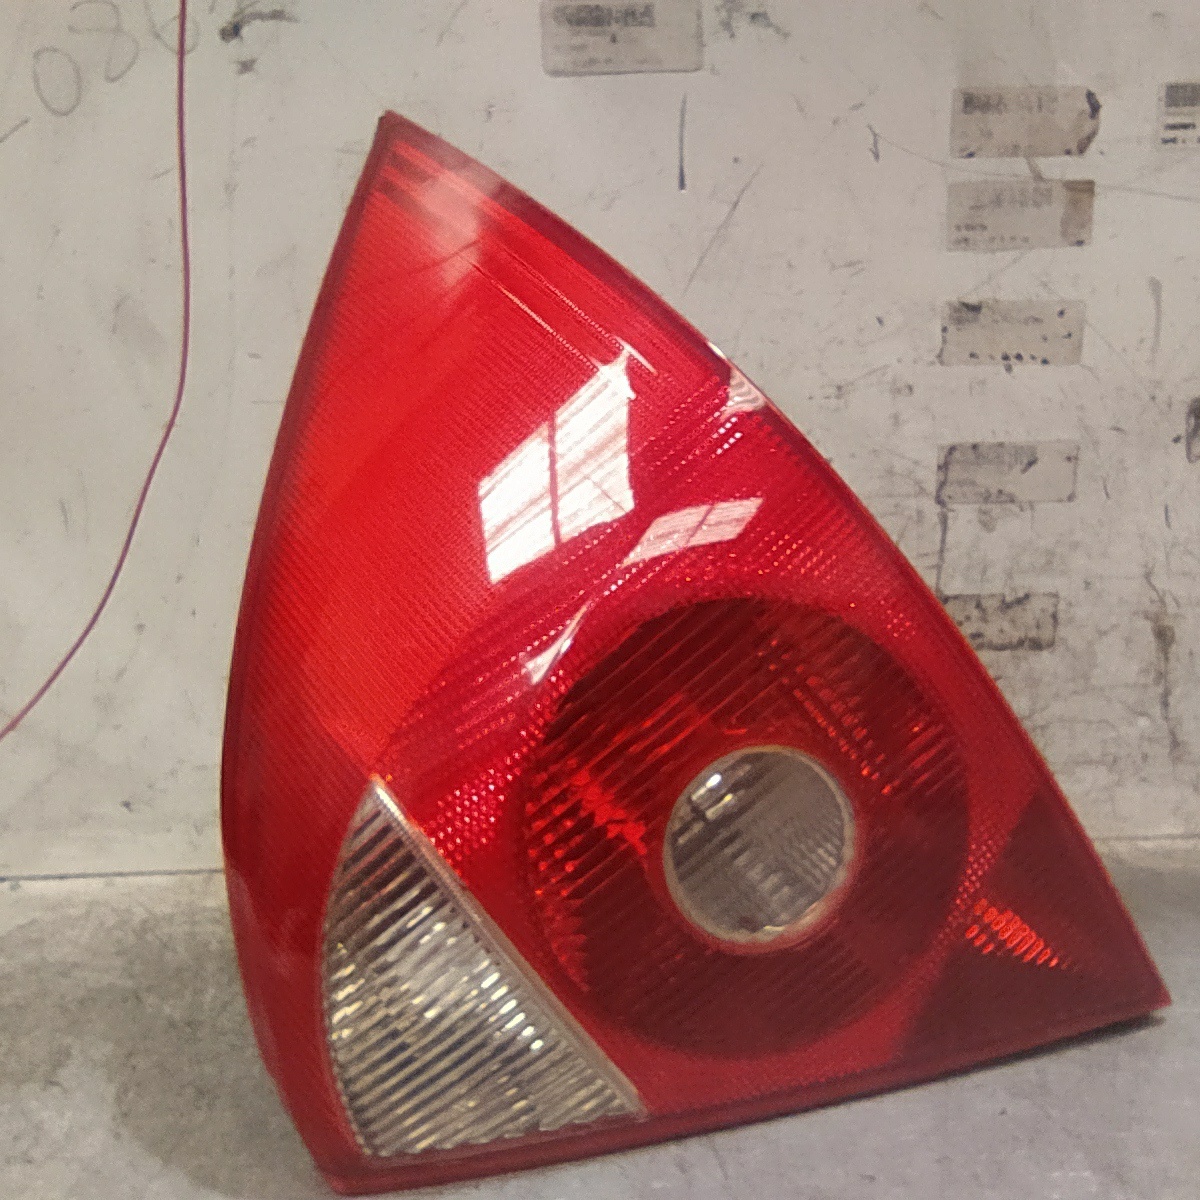 VOLKSWAGEN Rear Right Taillight Lamp 3S7113404A 25368723